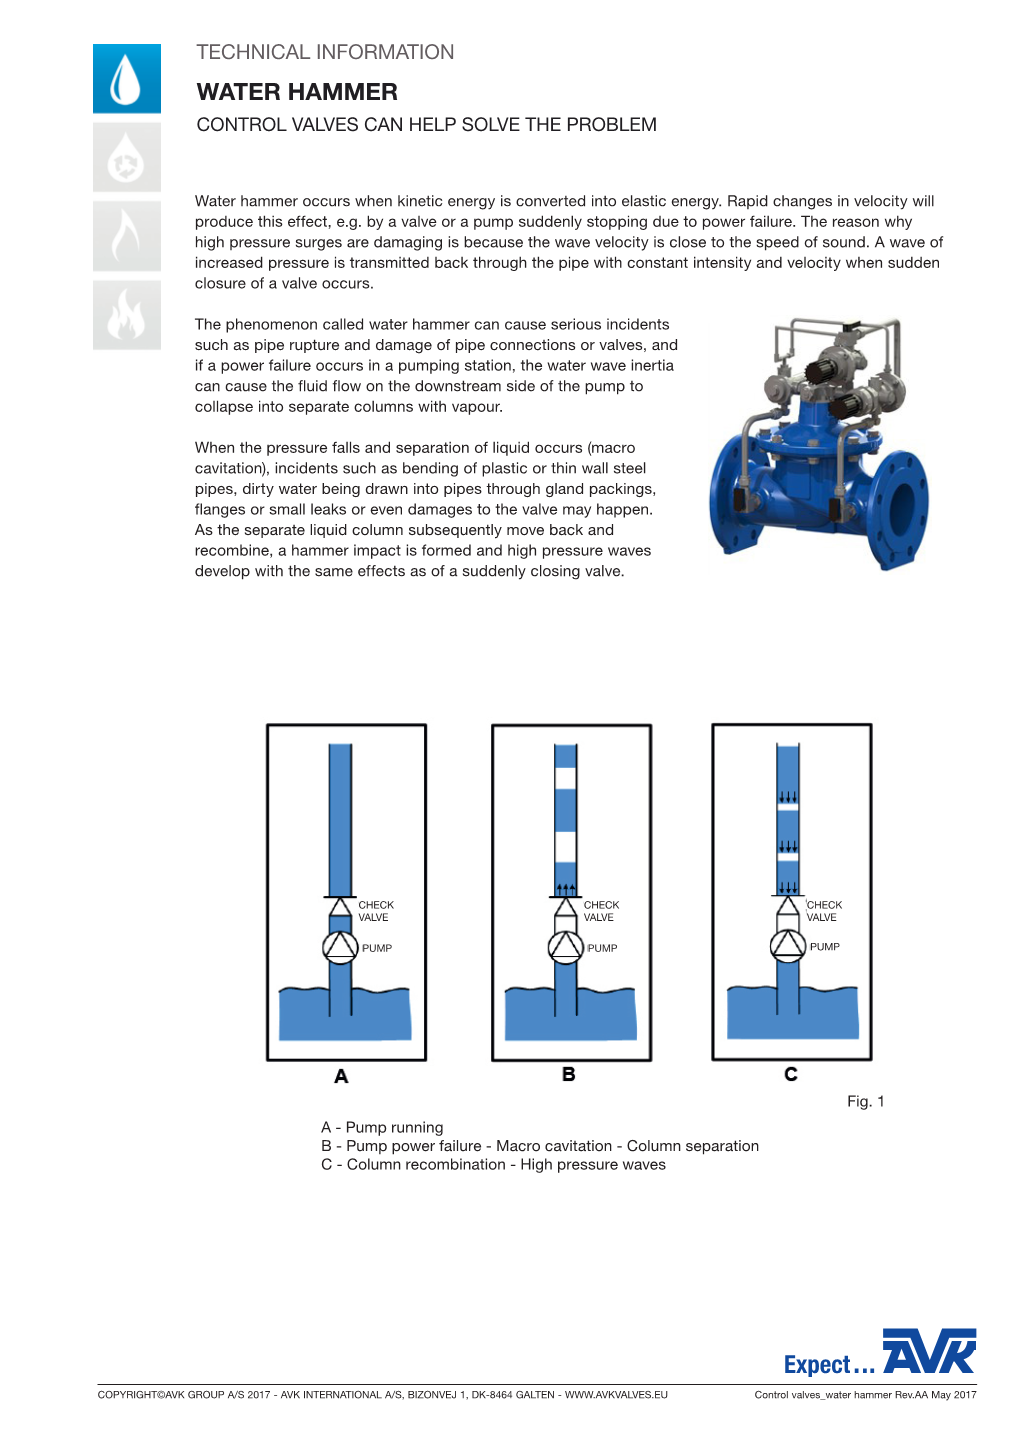 Technical Information Water Hammer Control Valves Can Help Solve the Problem